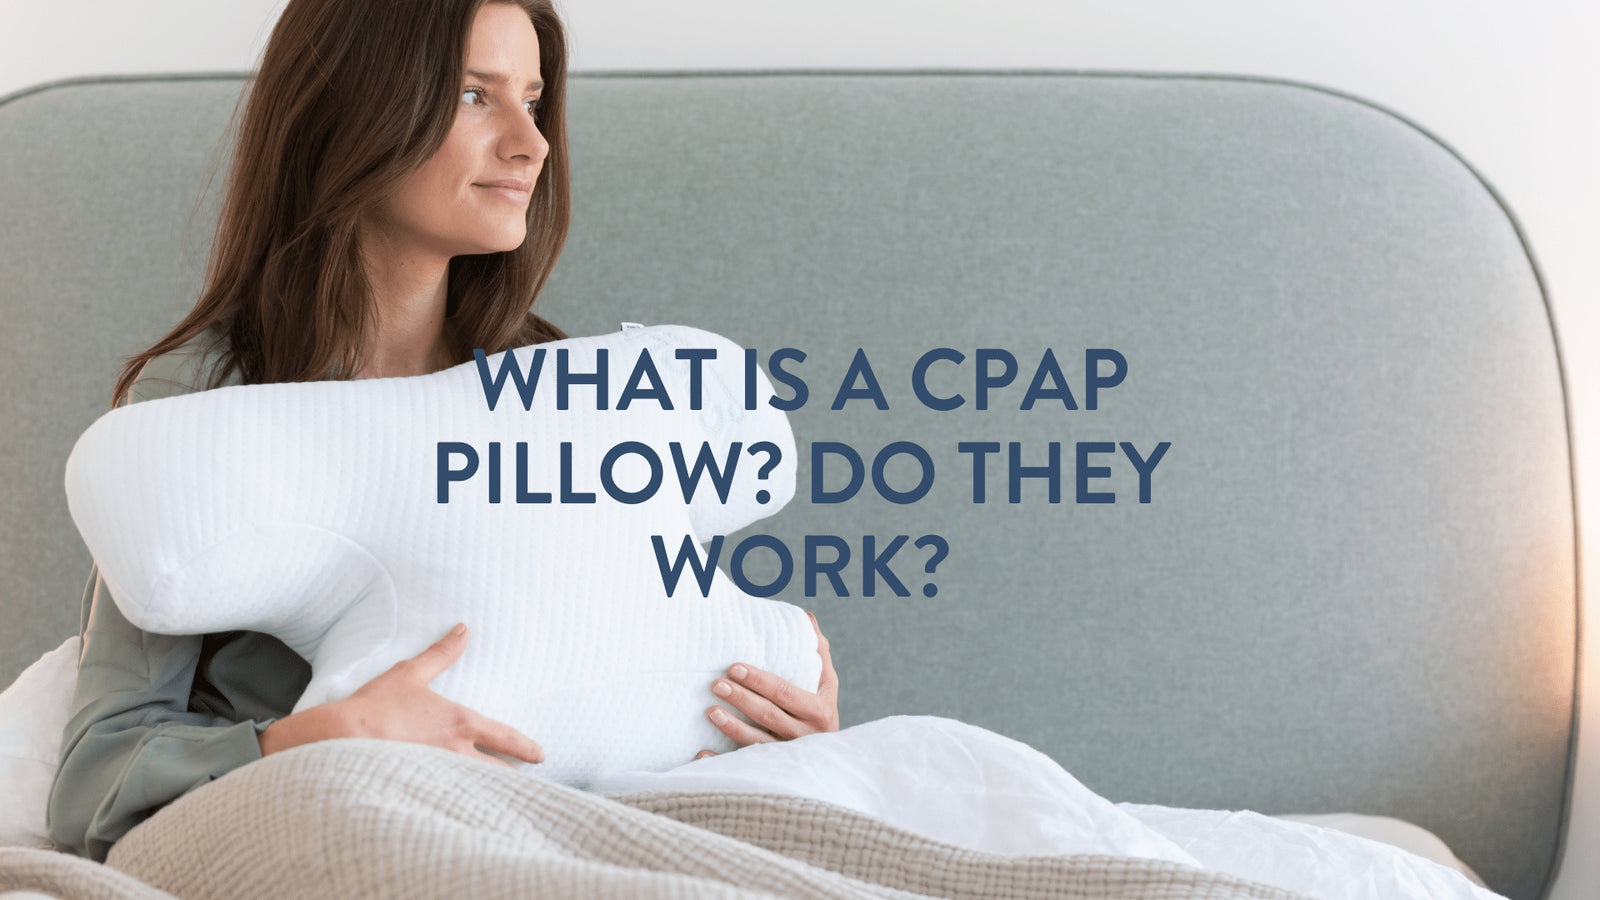 What is a CPAP pillow? - What does it do & does it work?